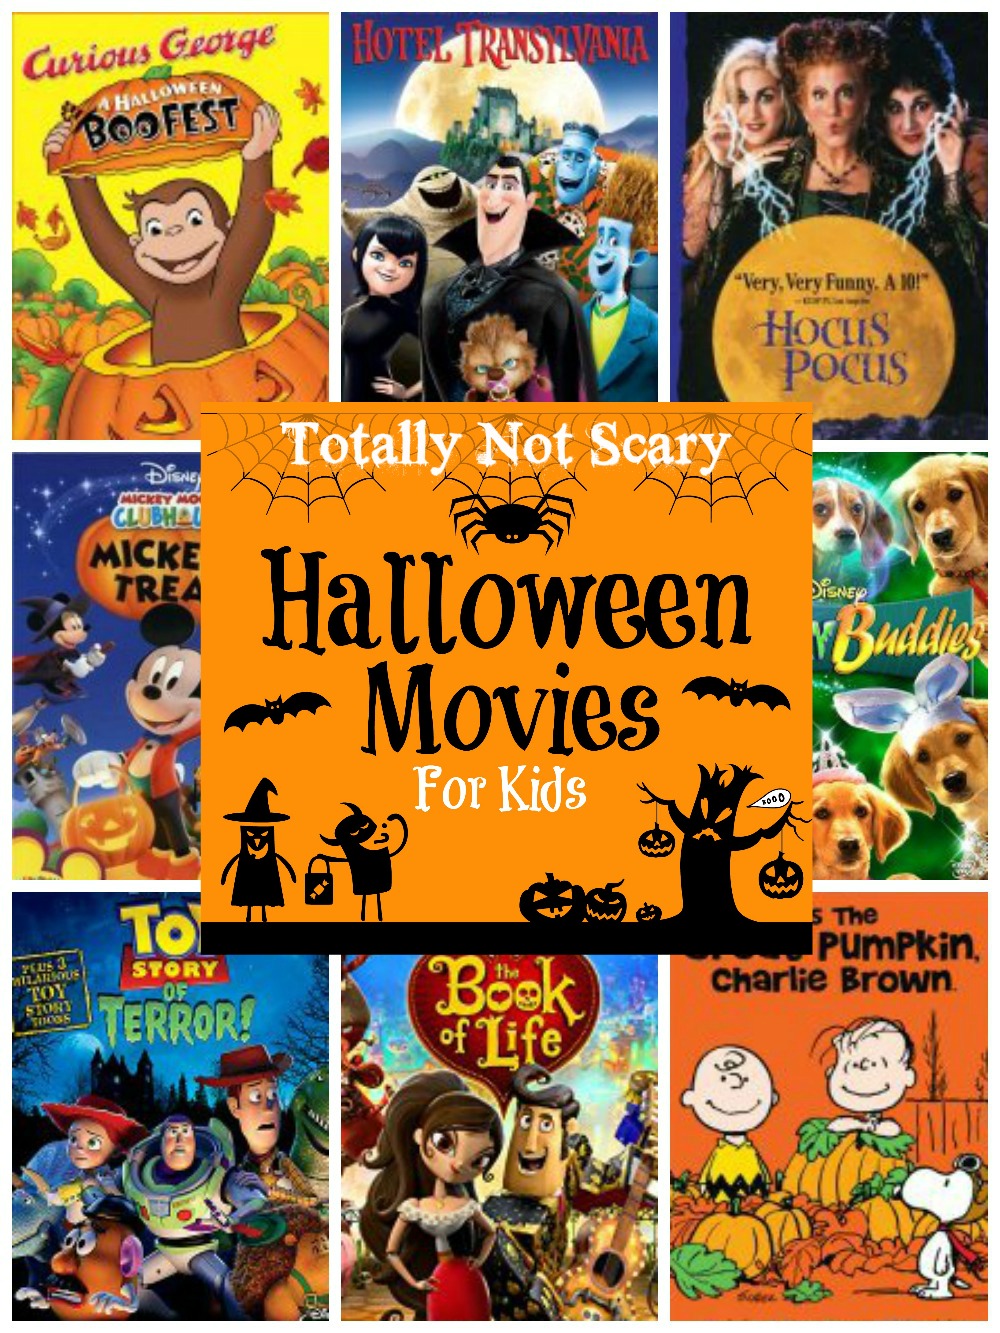 Totally not scary Halloween Movies for kids MommyMafia.com